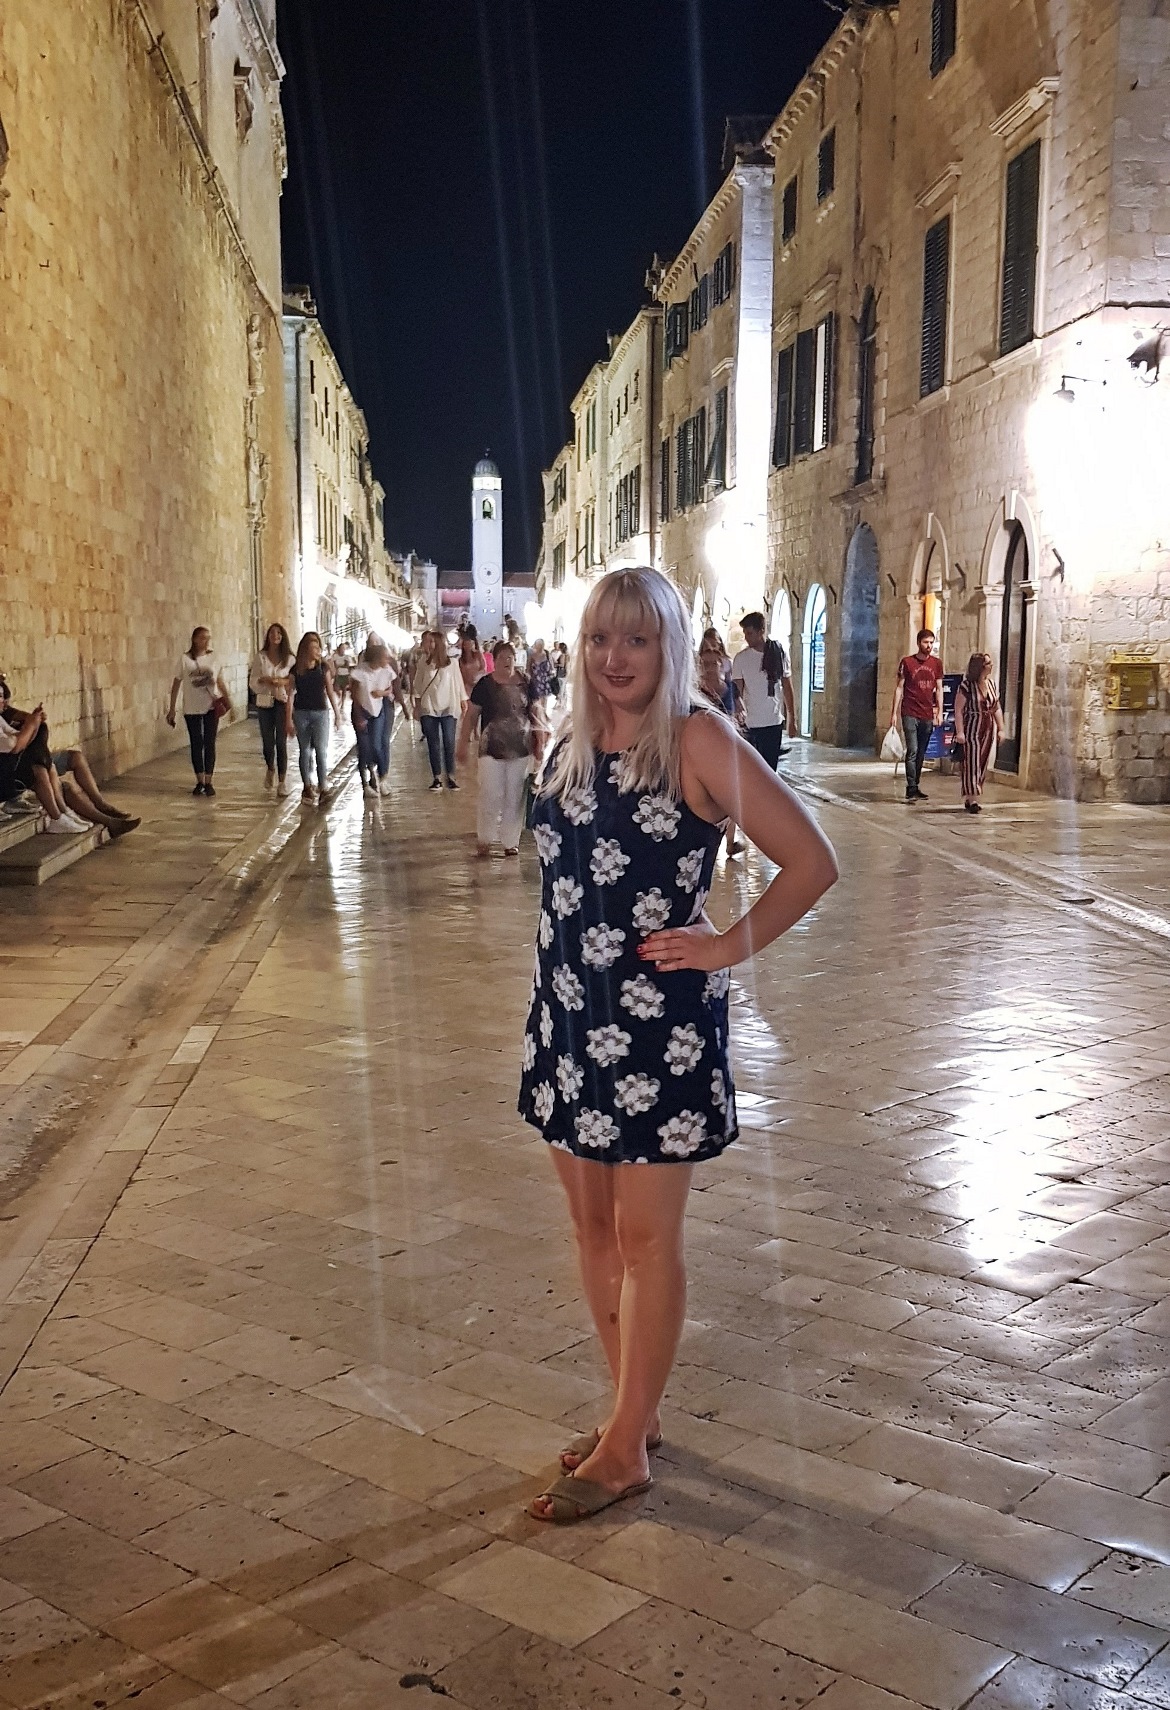 Strolling through the Old Town after sunset - Sightseeing in Dubrovnik, Croatia - Top Travel Tips by BeckyBecky Blogs